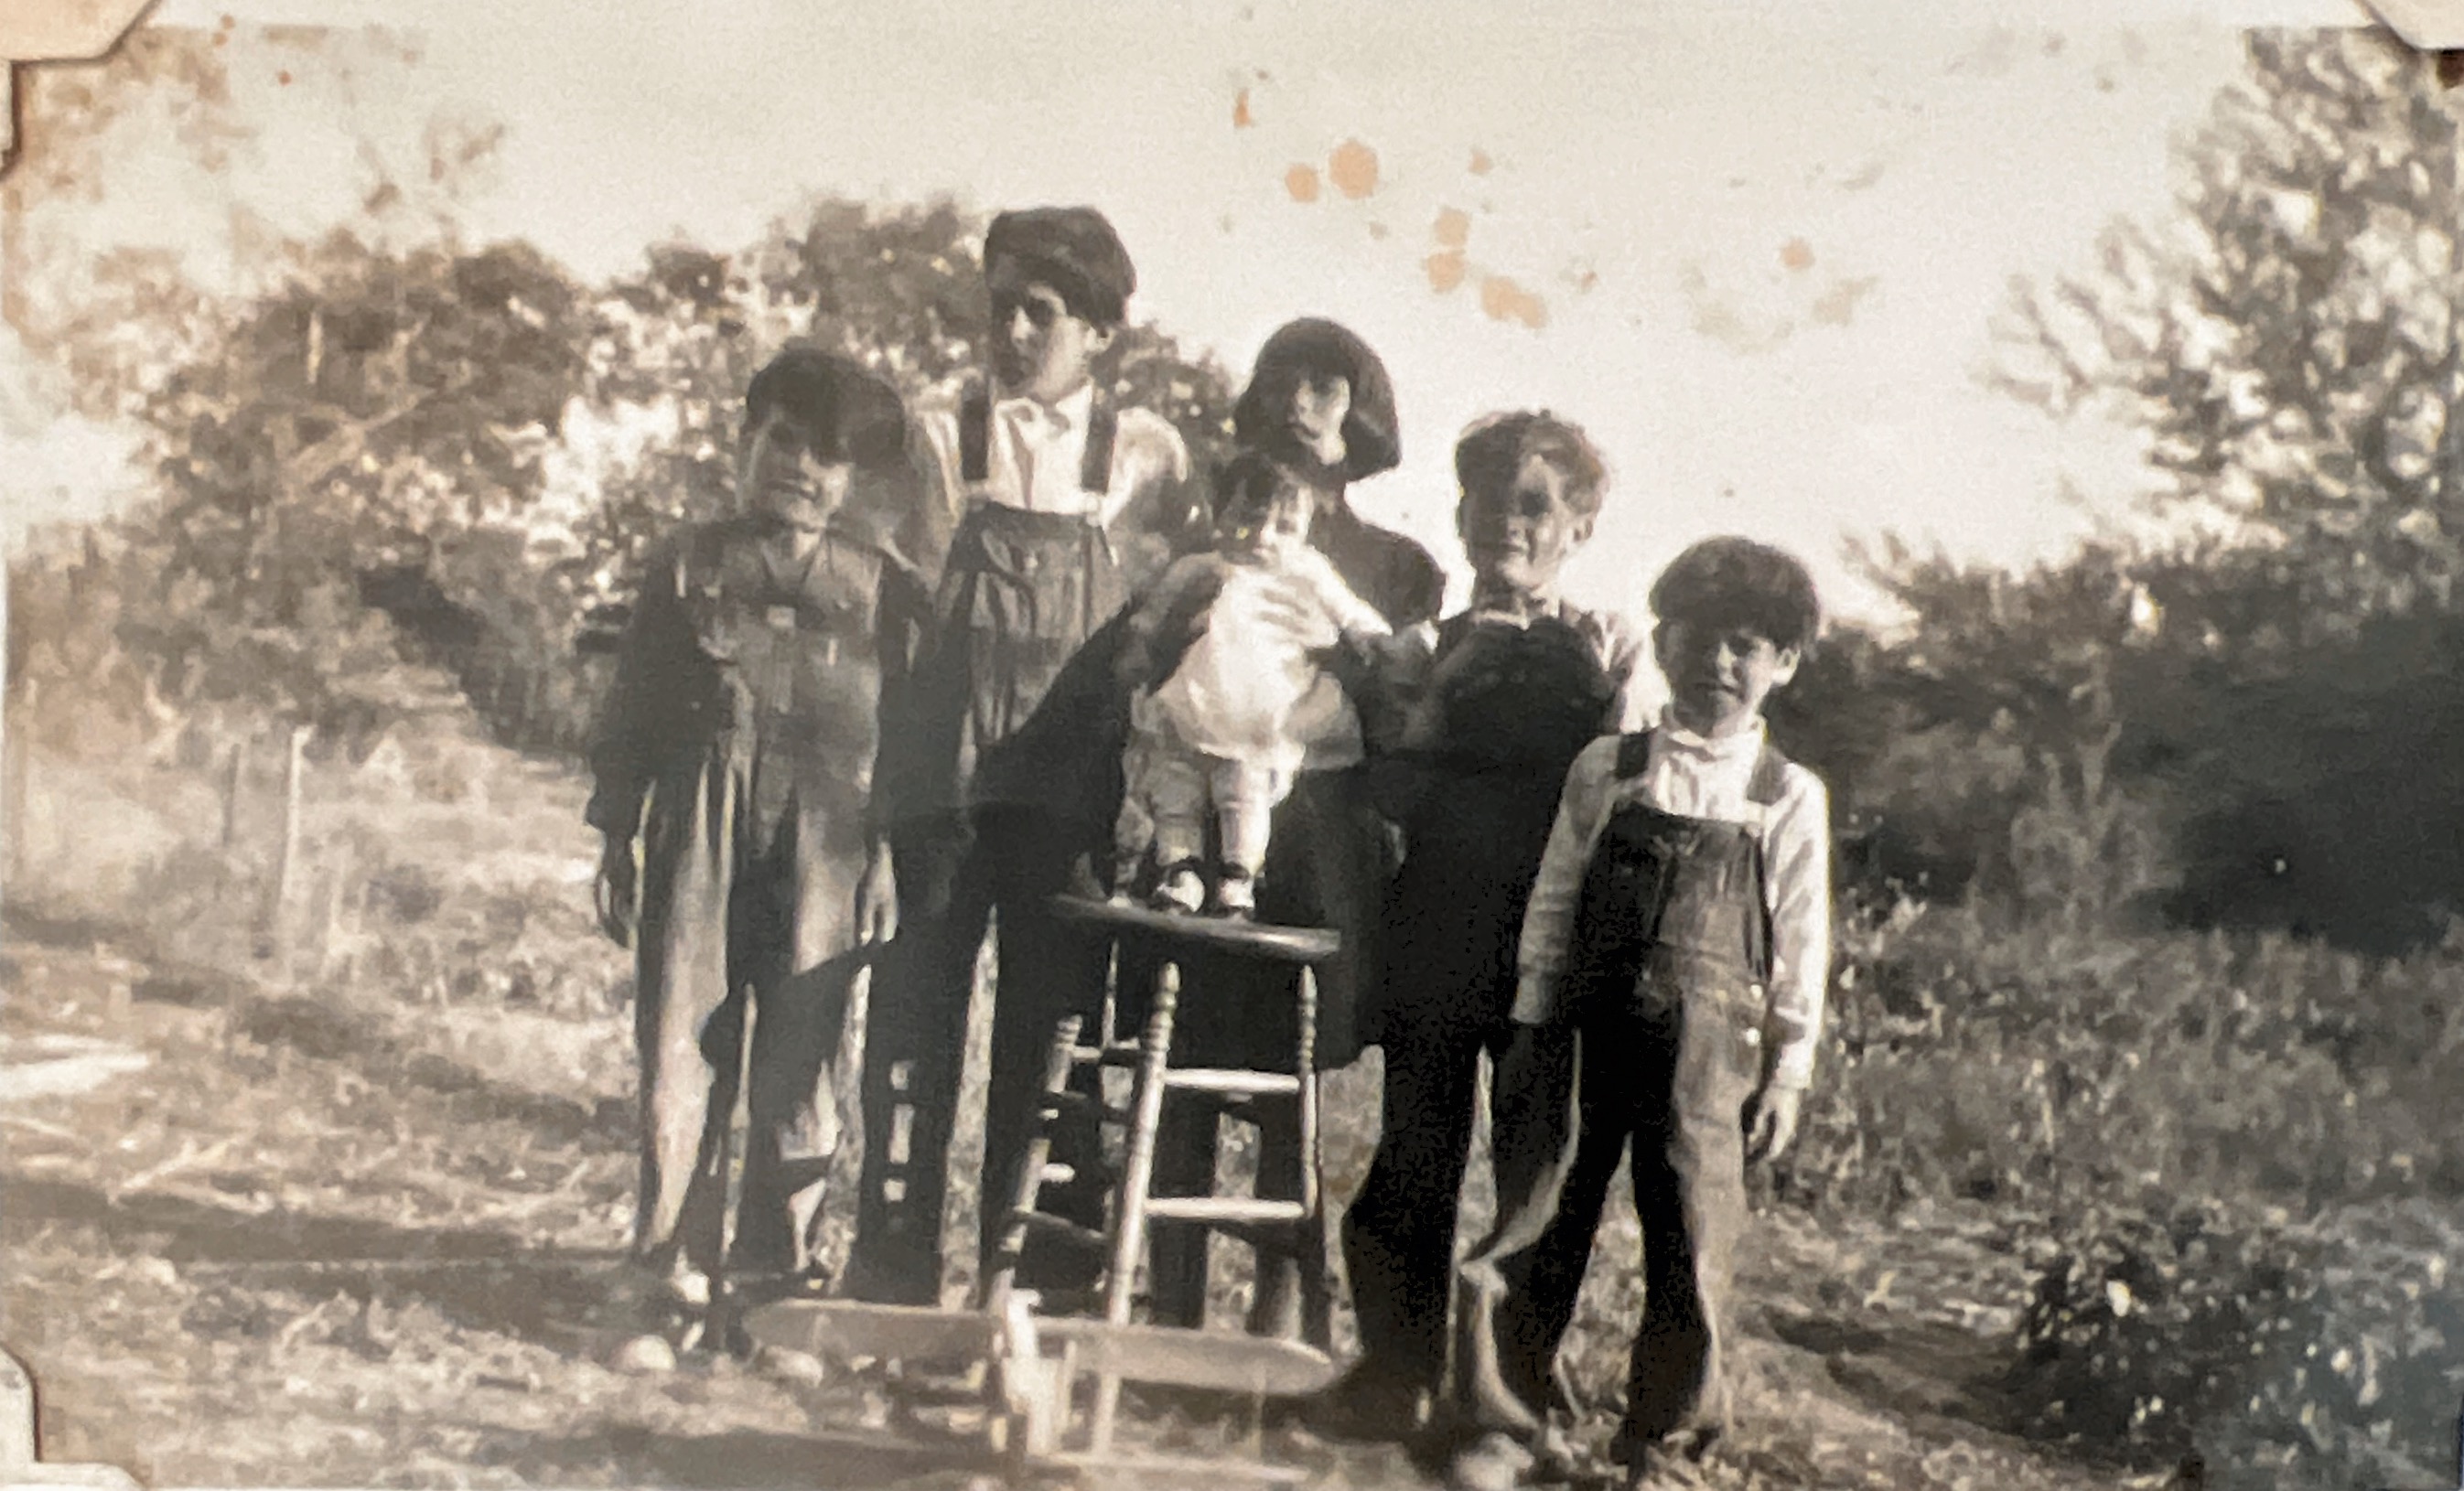 Jack, Duane, Maxine, Jerry & Billy with Phyllis on the stool. Approximately late 1929